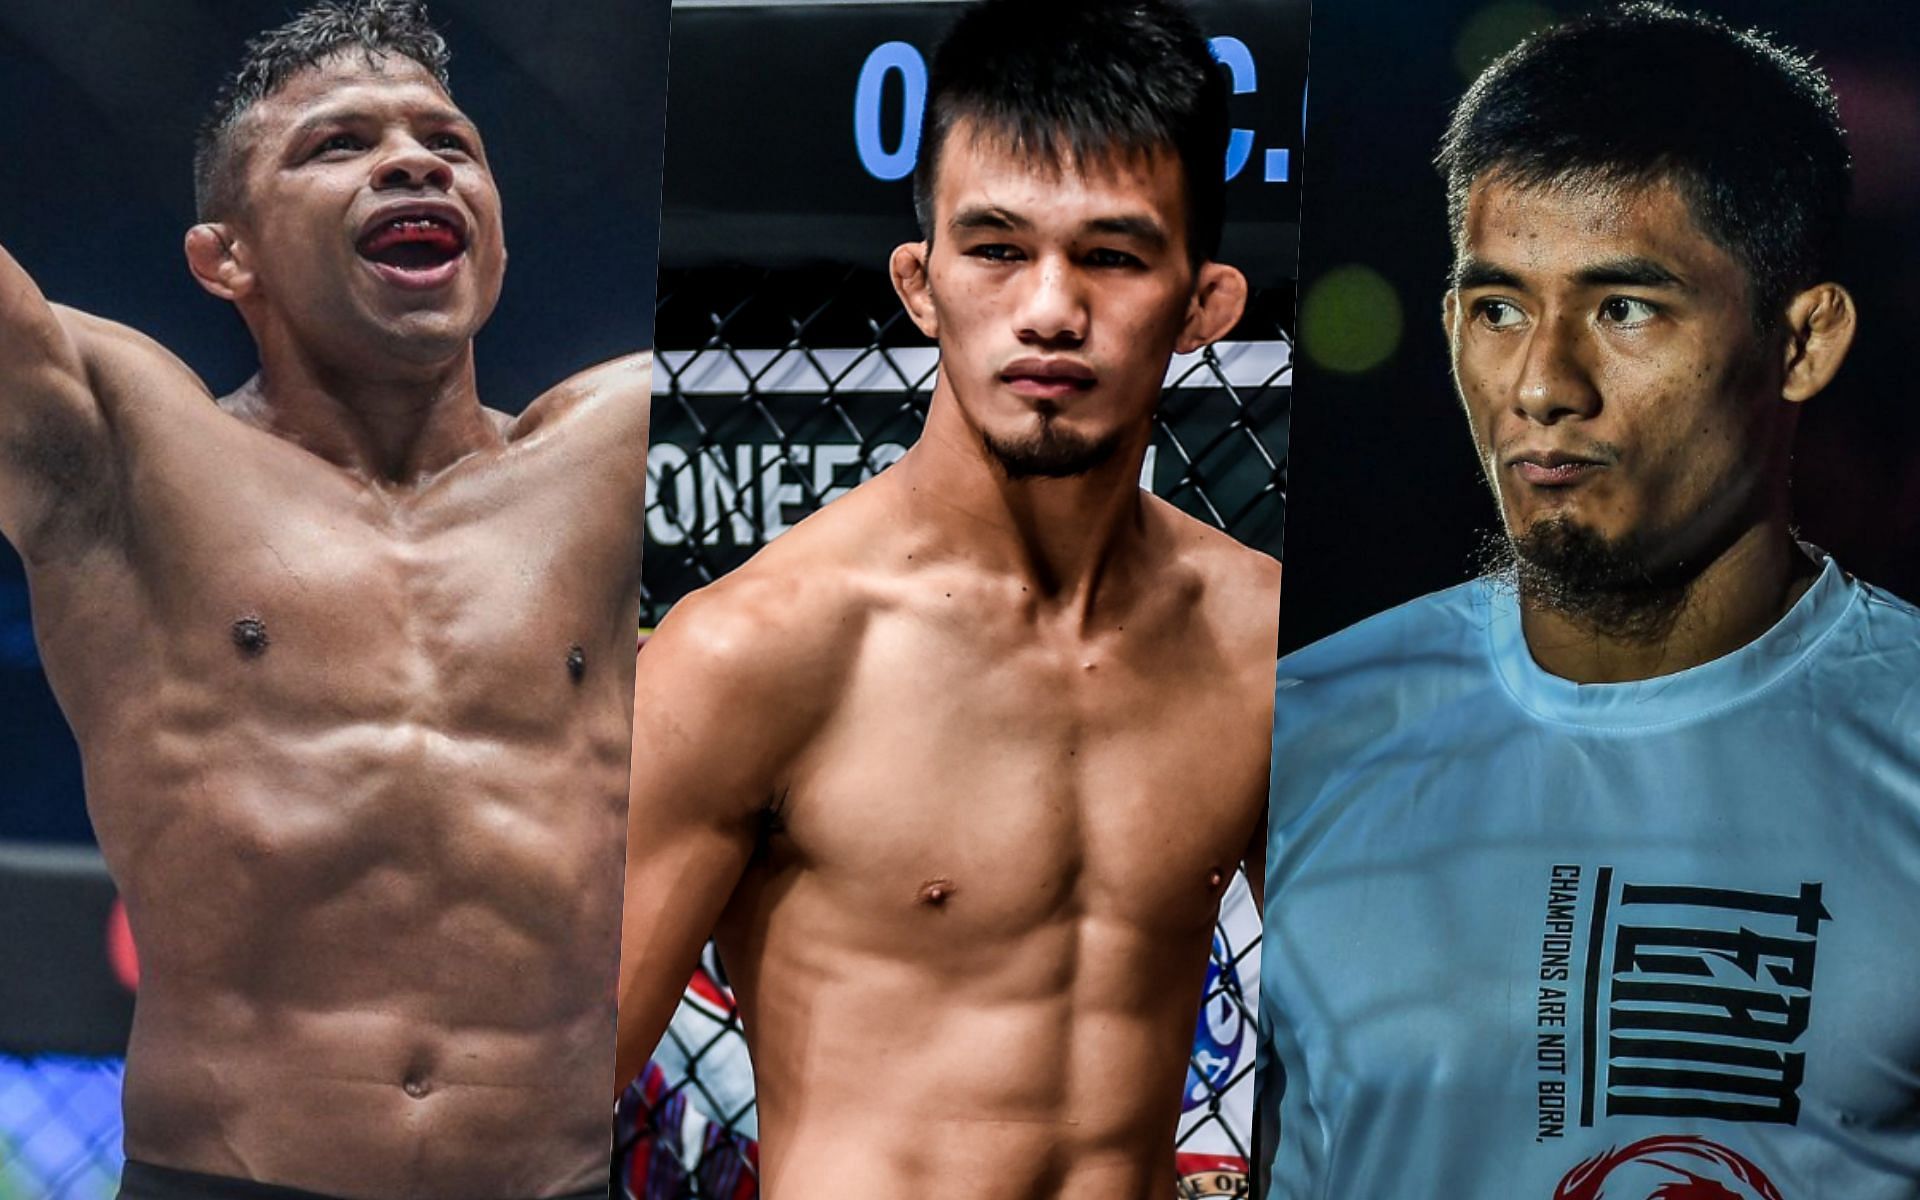 Jeremy Pacatiw (M) believes Bibiano Fernandes (L) will have a hard time keeping Stephen Loman down (R) in their fight. | Photo by ONE Championship